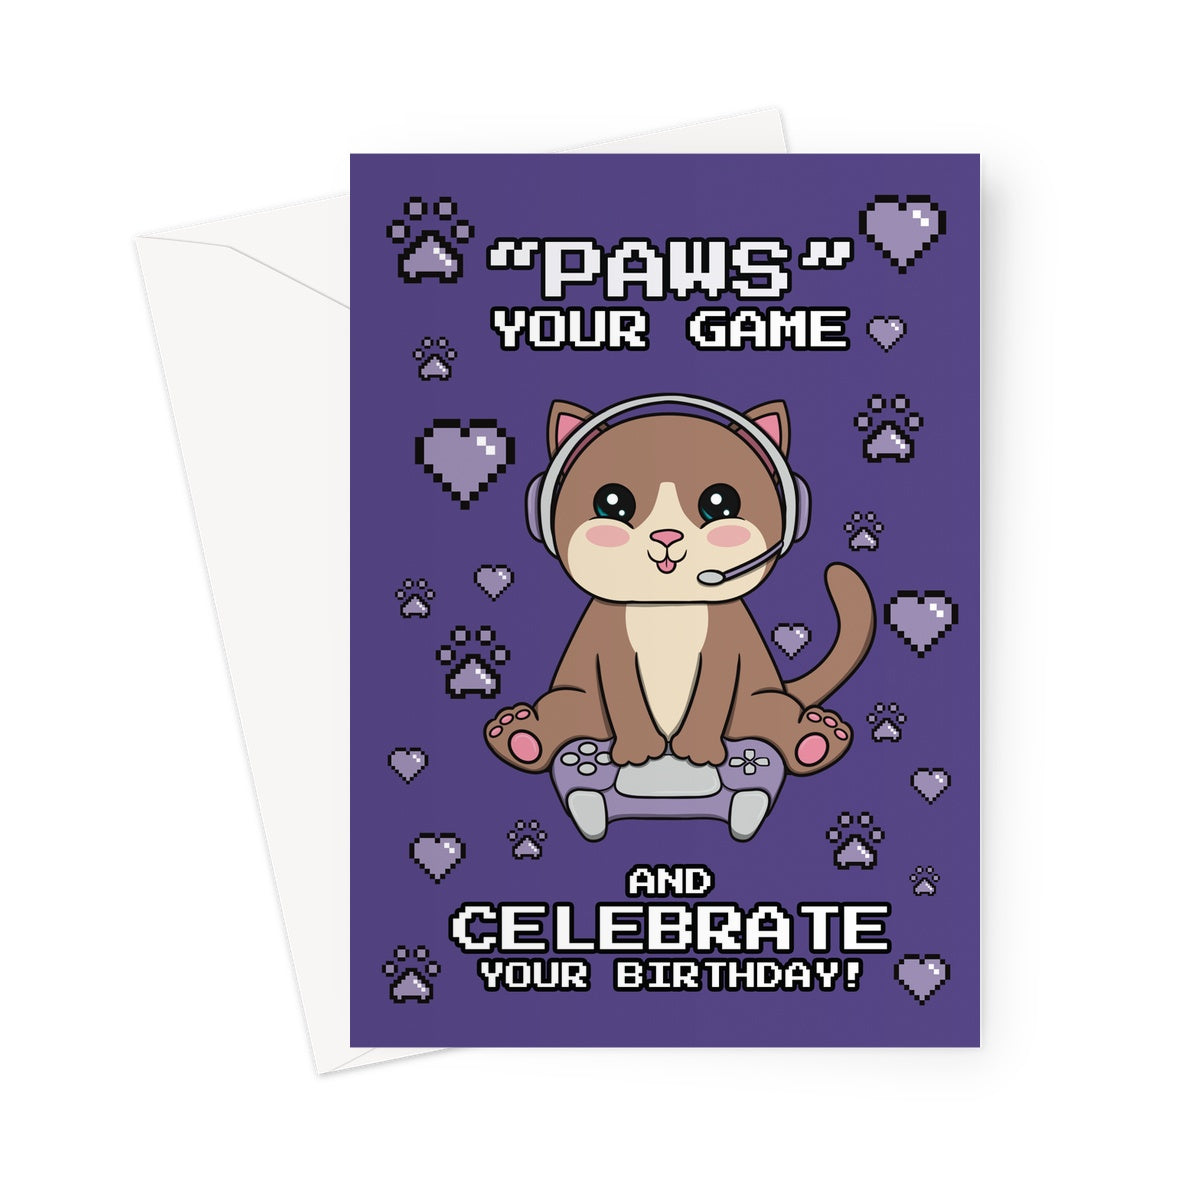 Cute cat birthday card playing video games